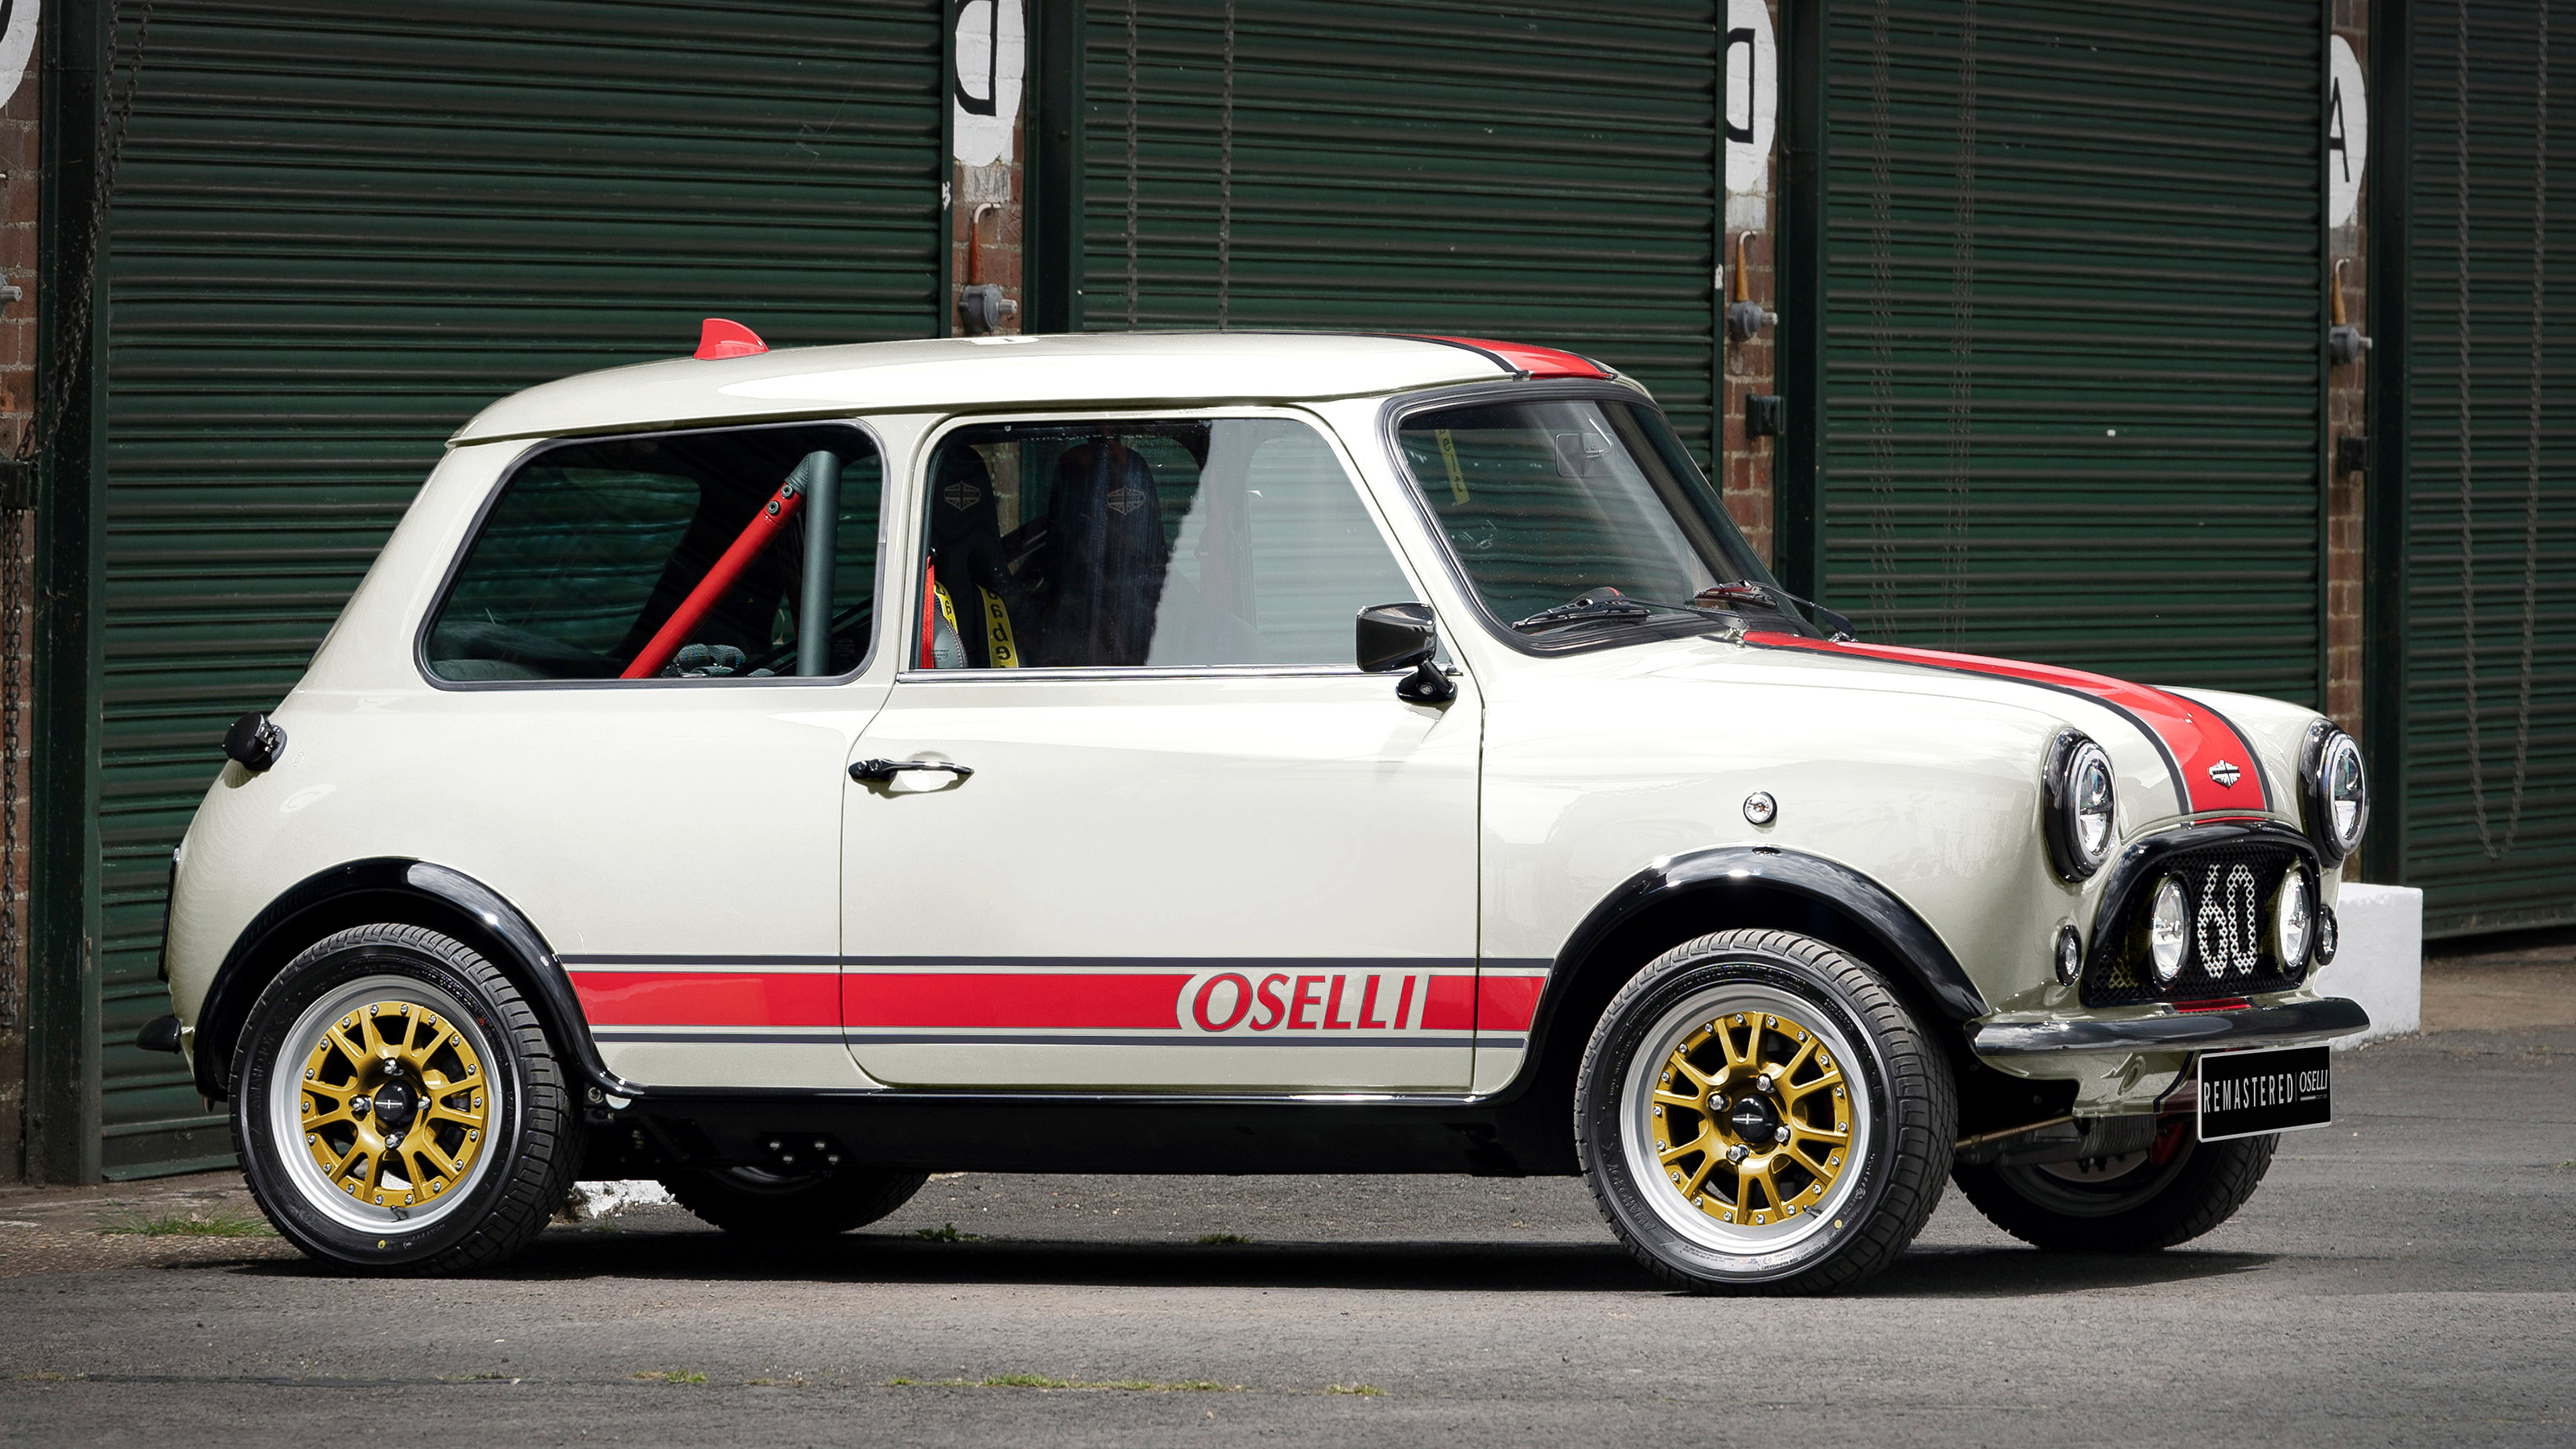 Review: The David Brown Mini Remastered Oselli Edition is a